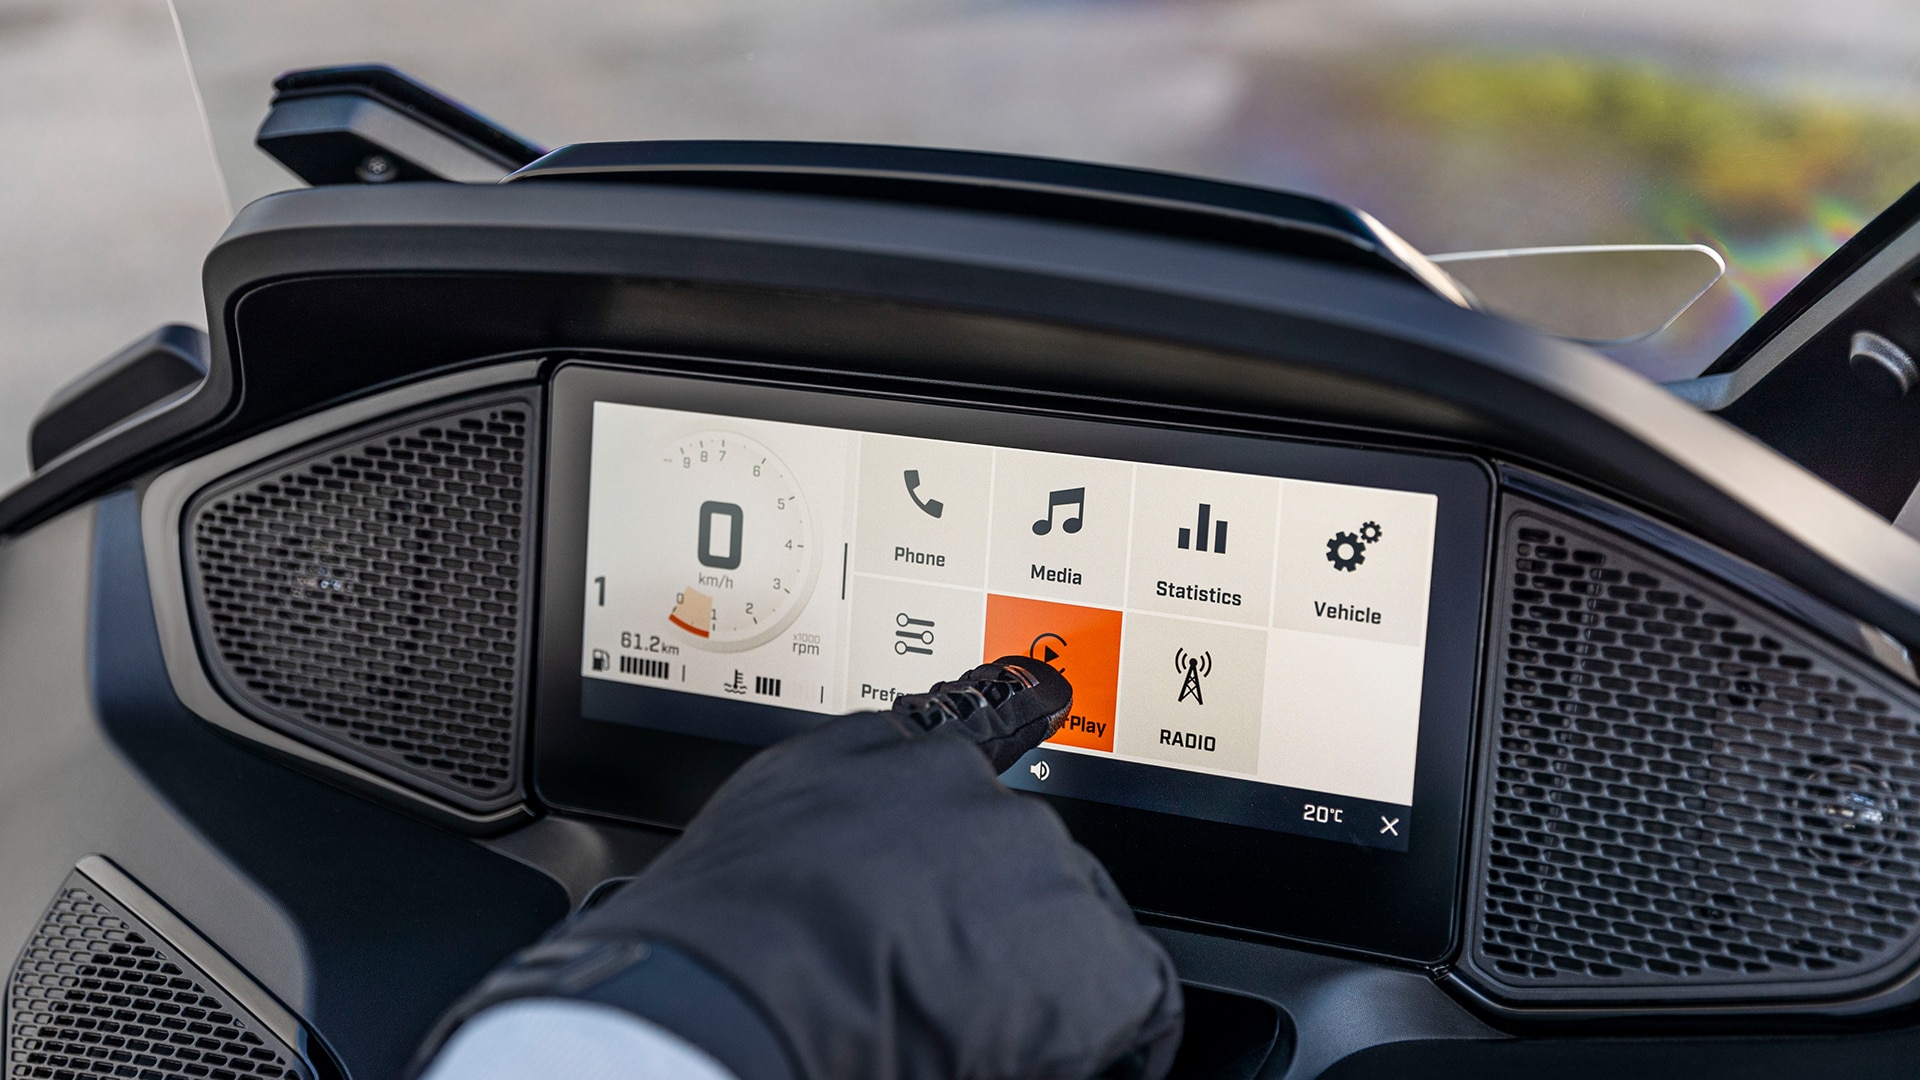 10.25" touchscreen display on the Can-Am Spyder F3